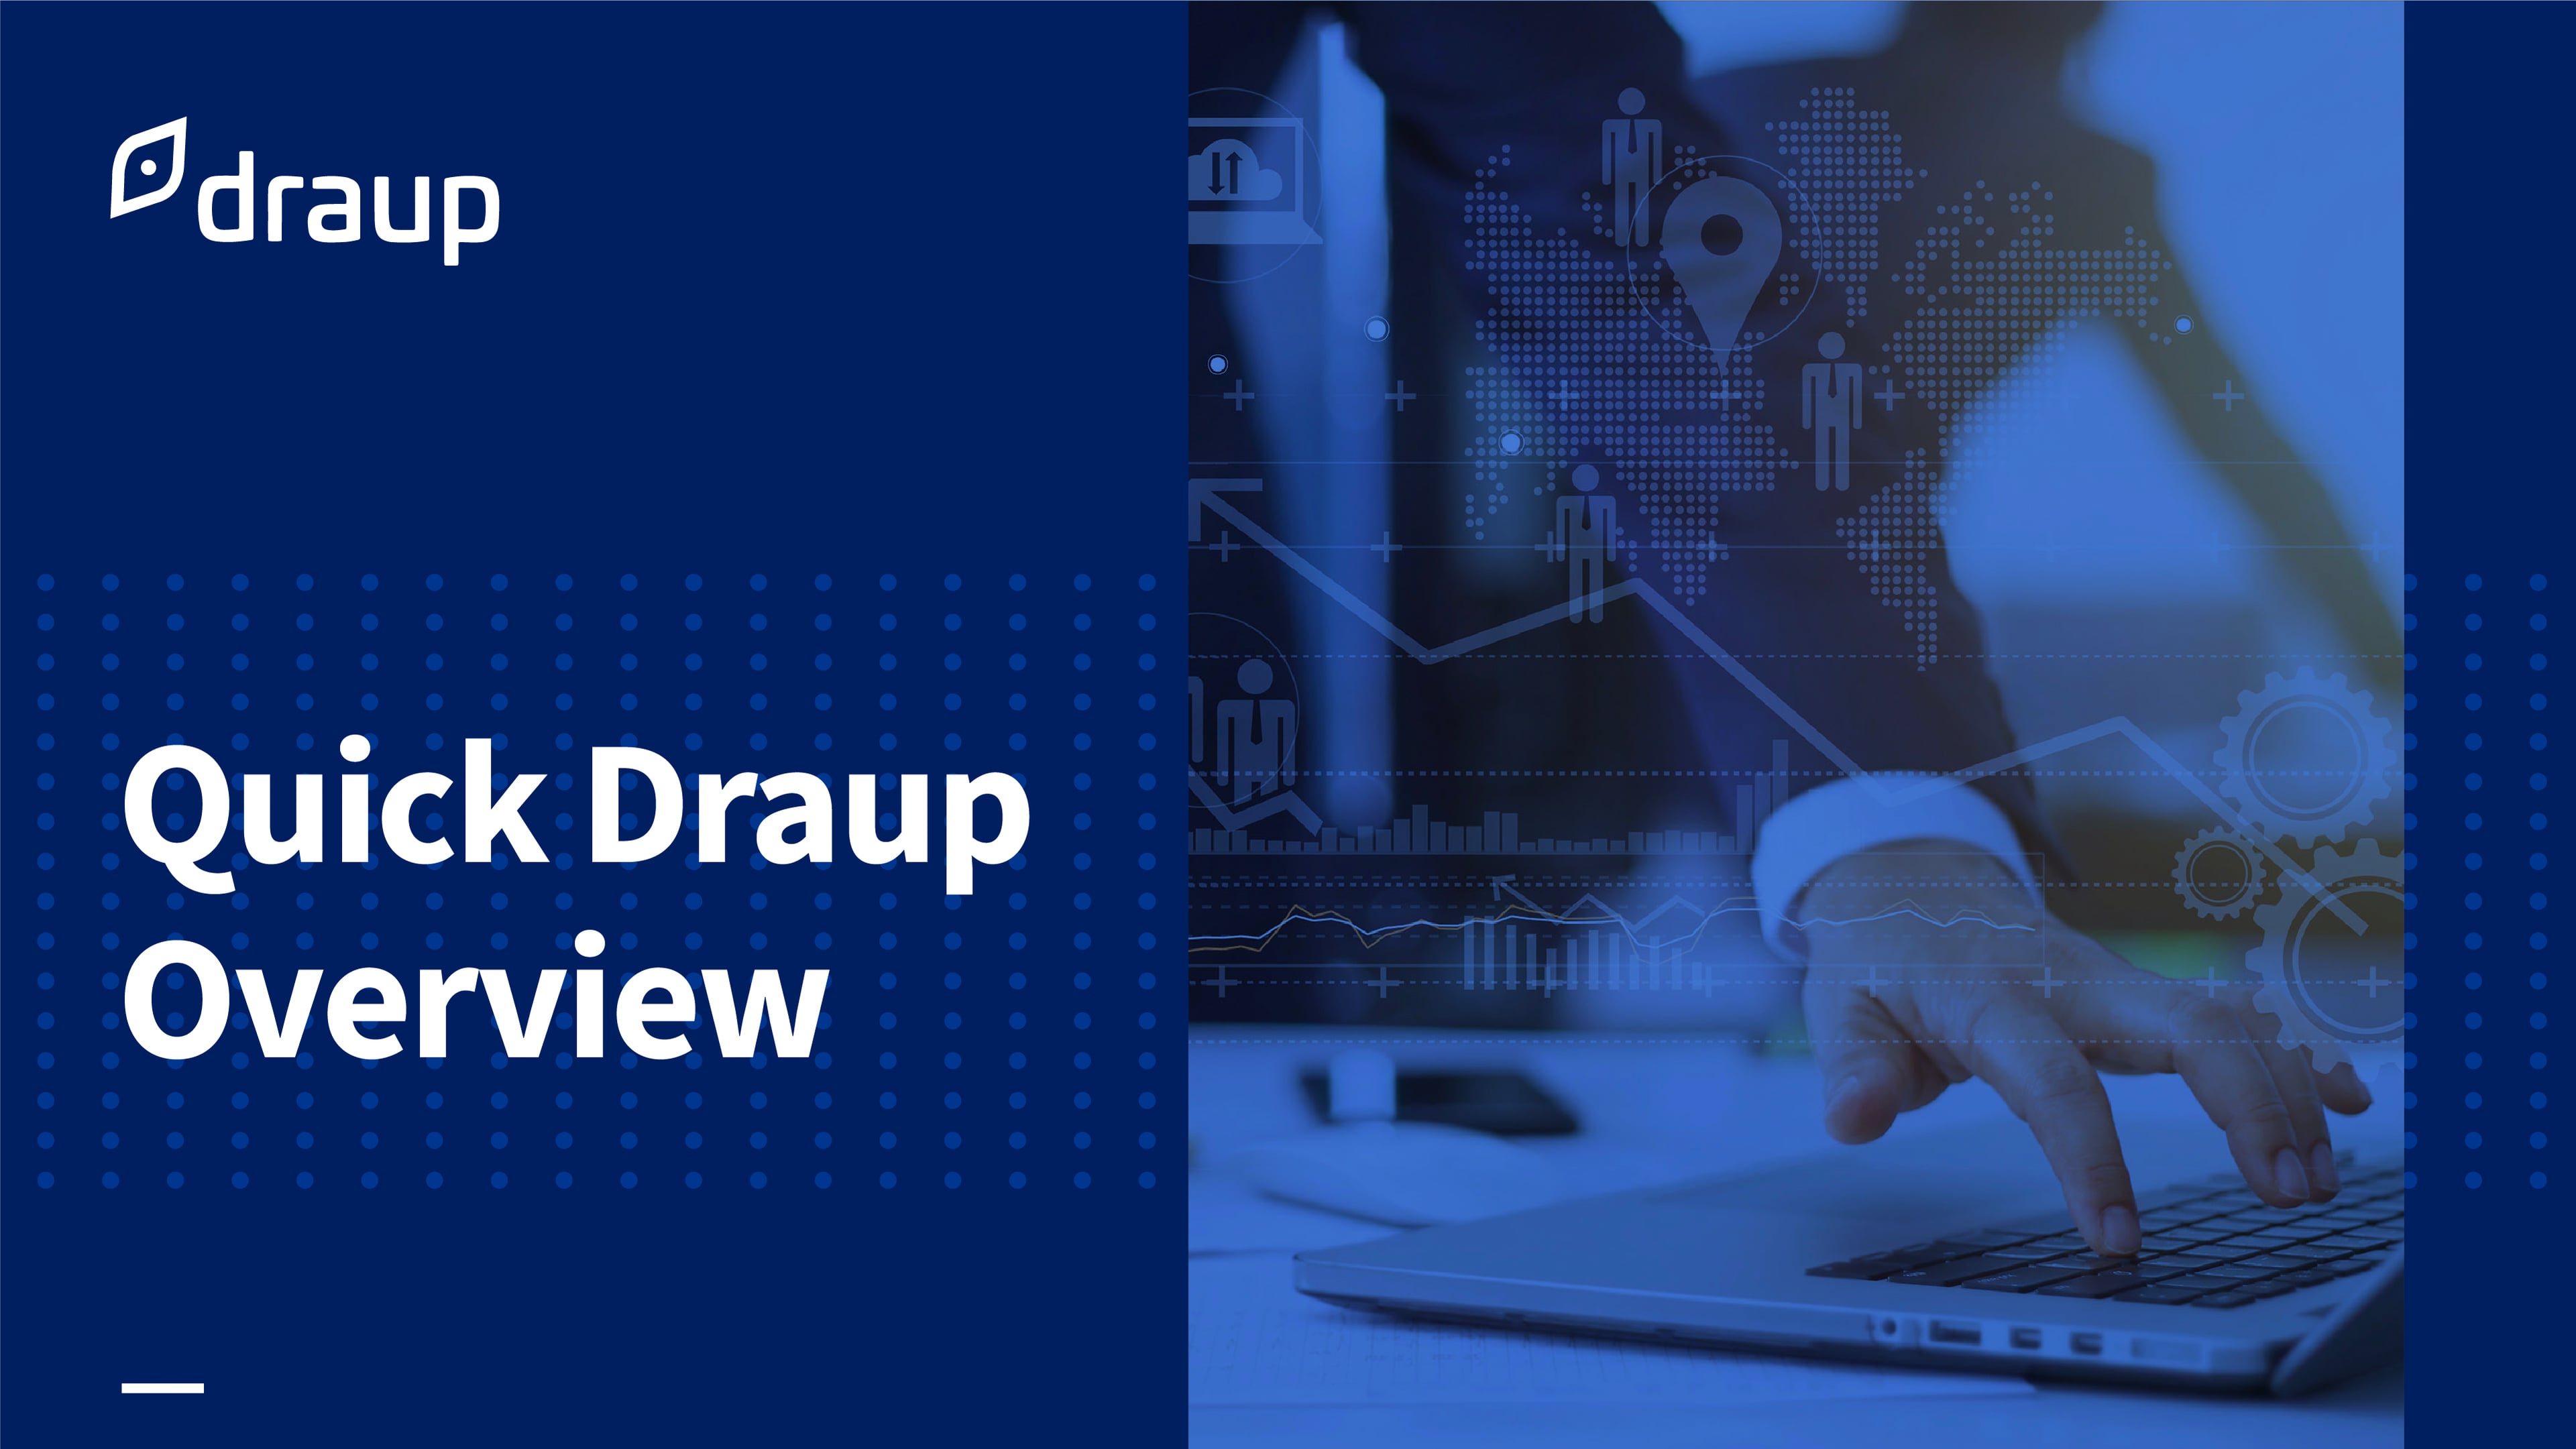 Draup Product Overview